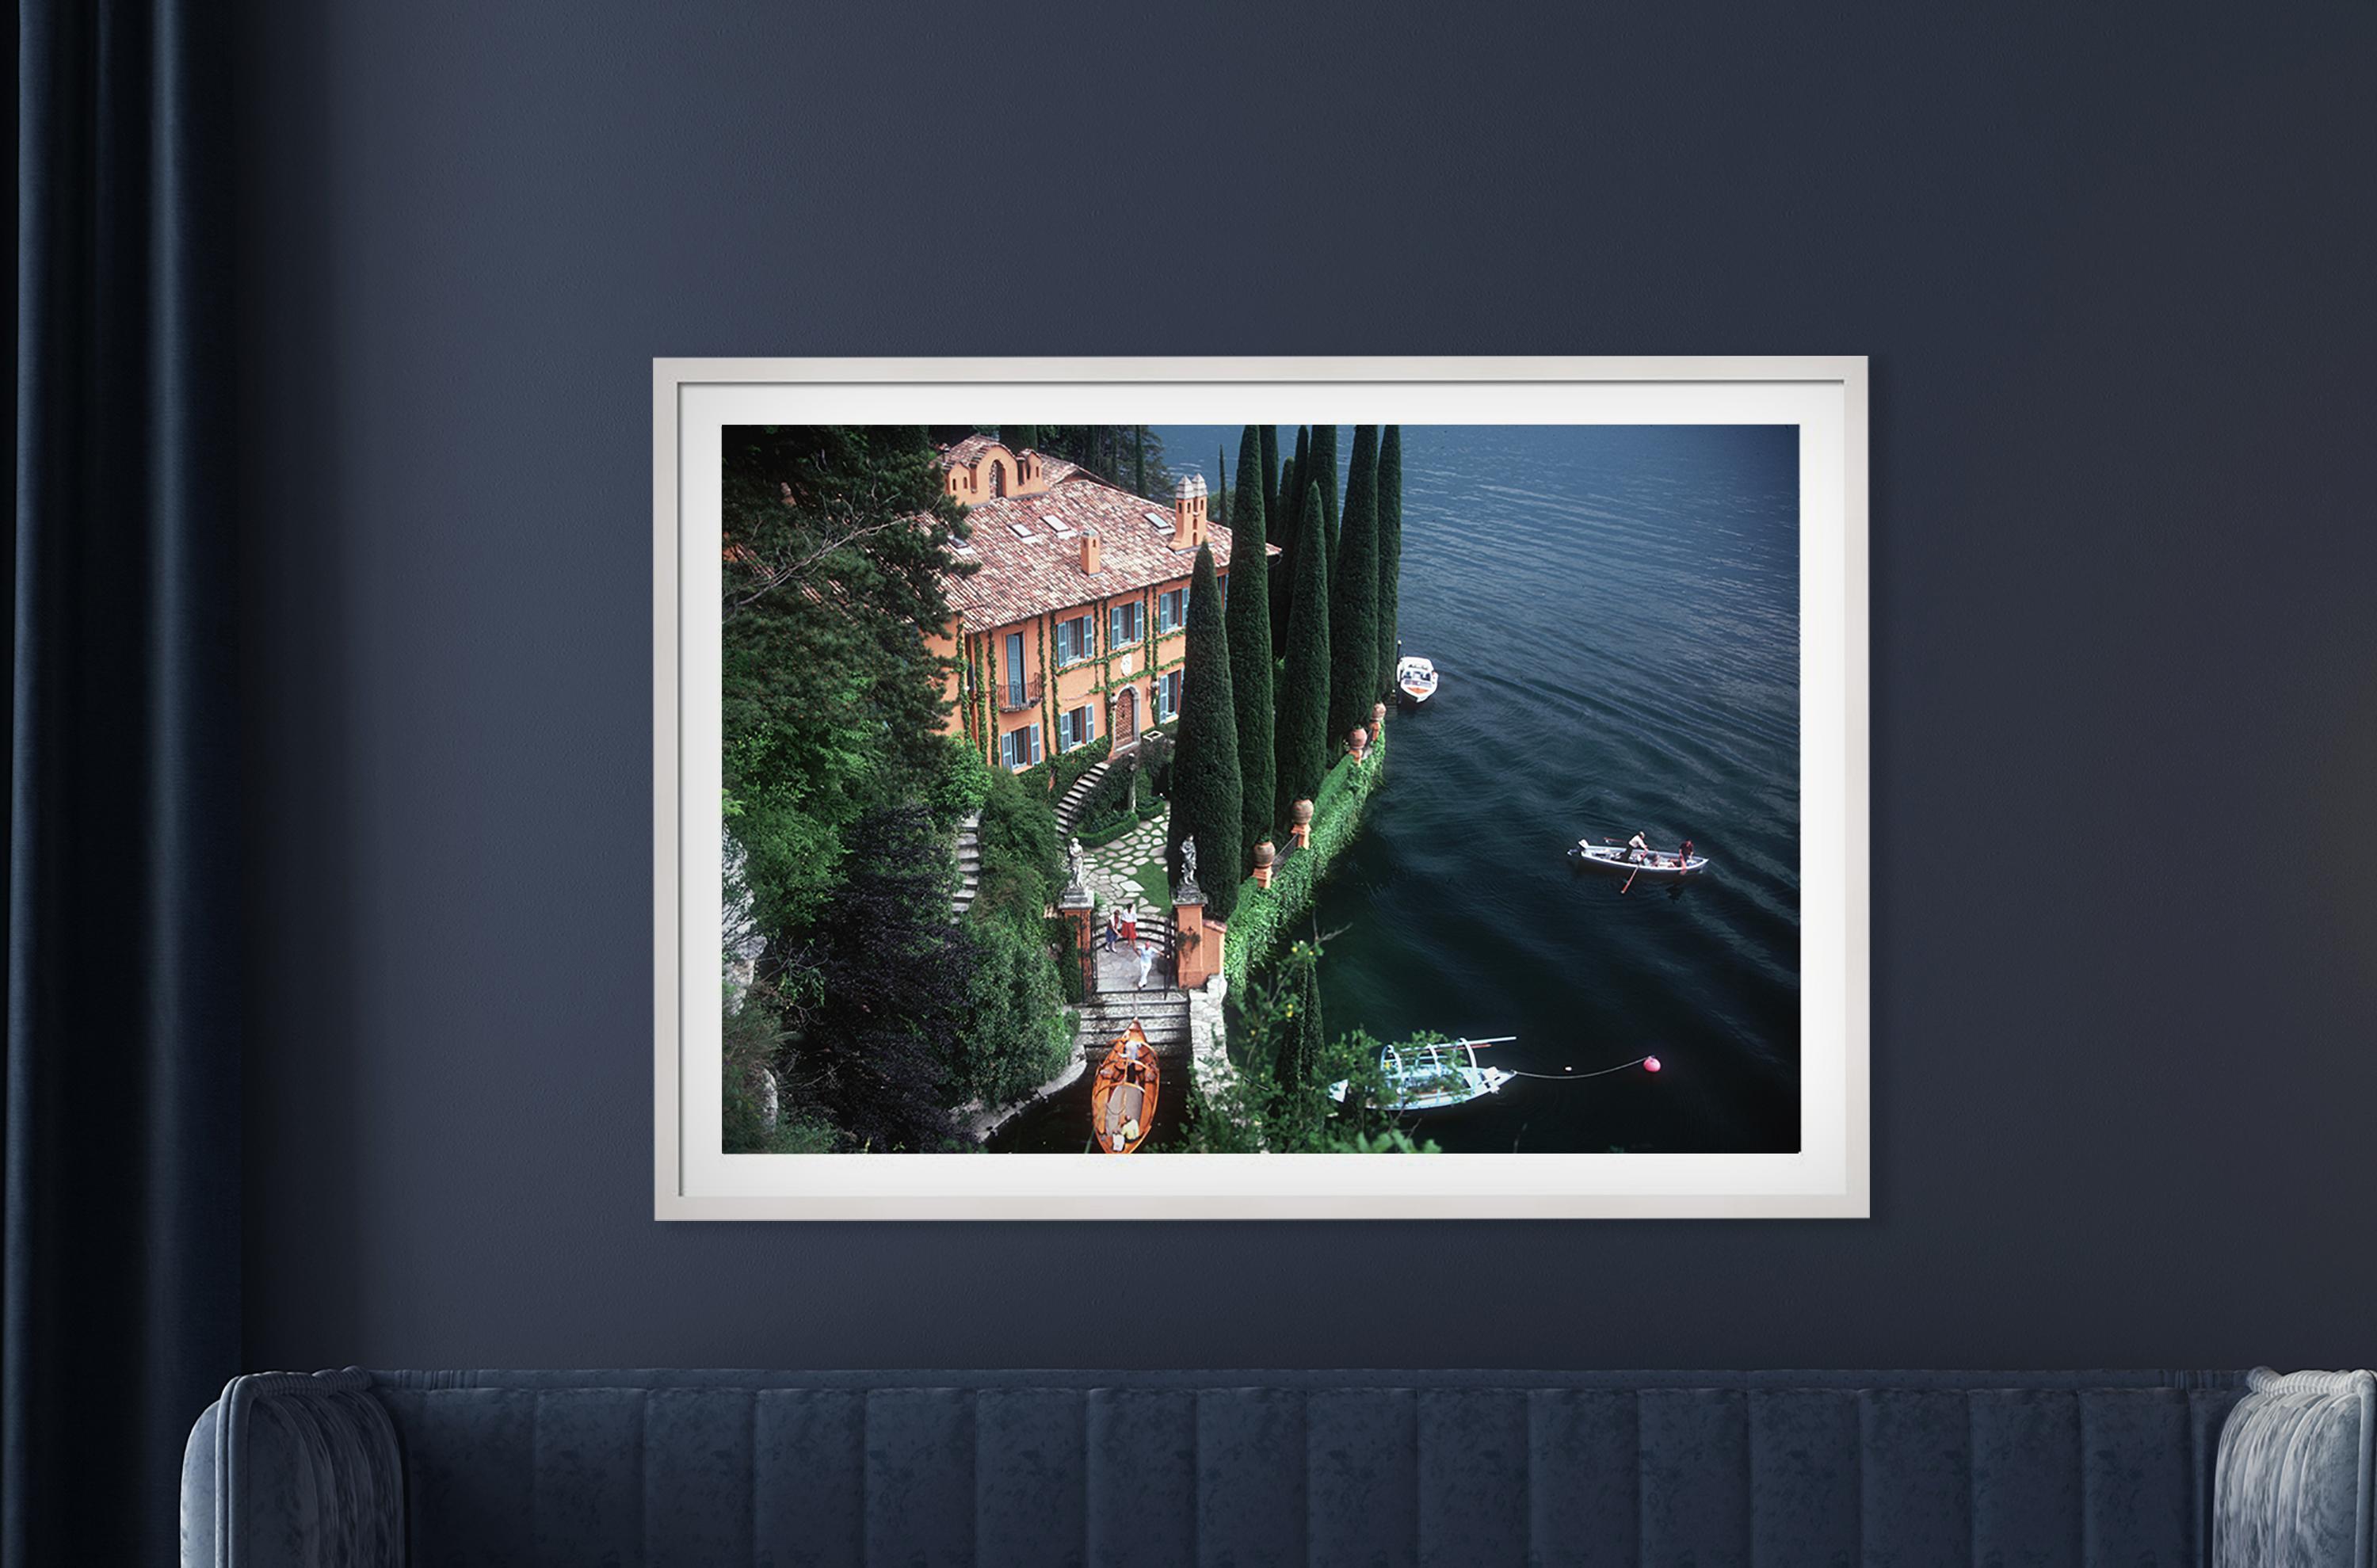 Giacomo and Stefania Montegazza welcome guests arriving by boat at their villa, La Casinella, on Lake Como.

40 x 60 inches
$3950

30 x 40 inches
$3350

20 x 30 inches
$3000

Complimentary dealer shipping to your framer, worldwide.

Undercurrent